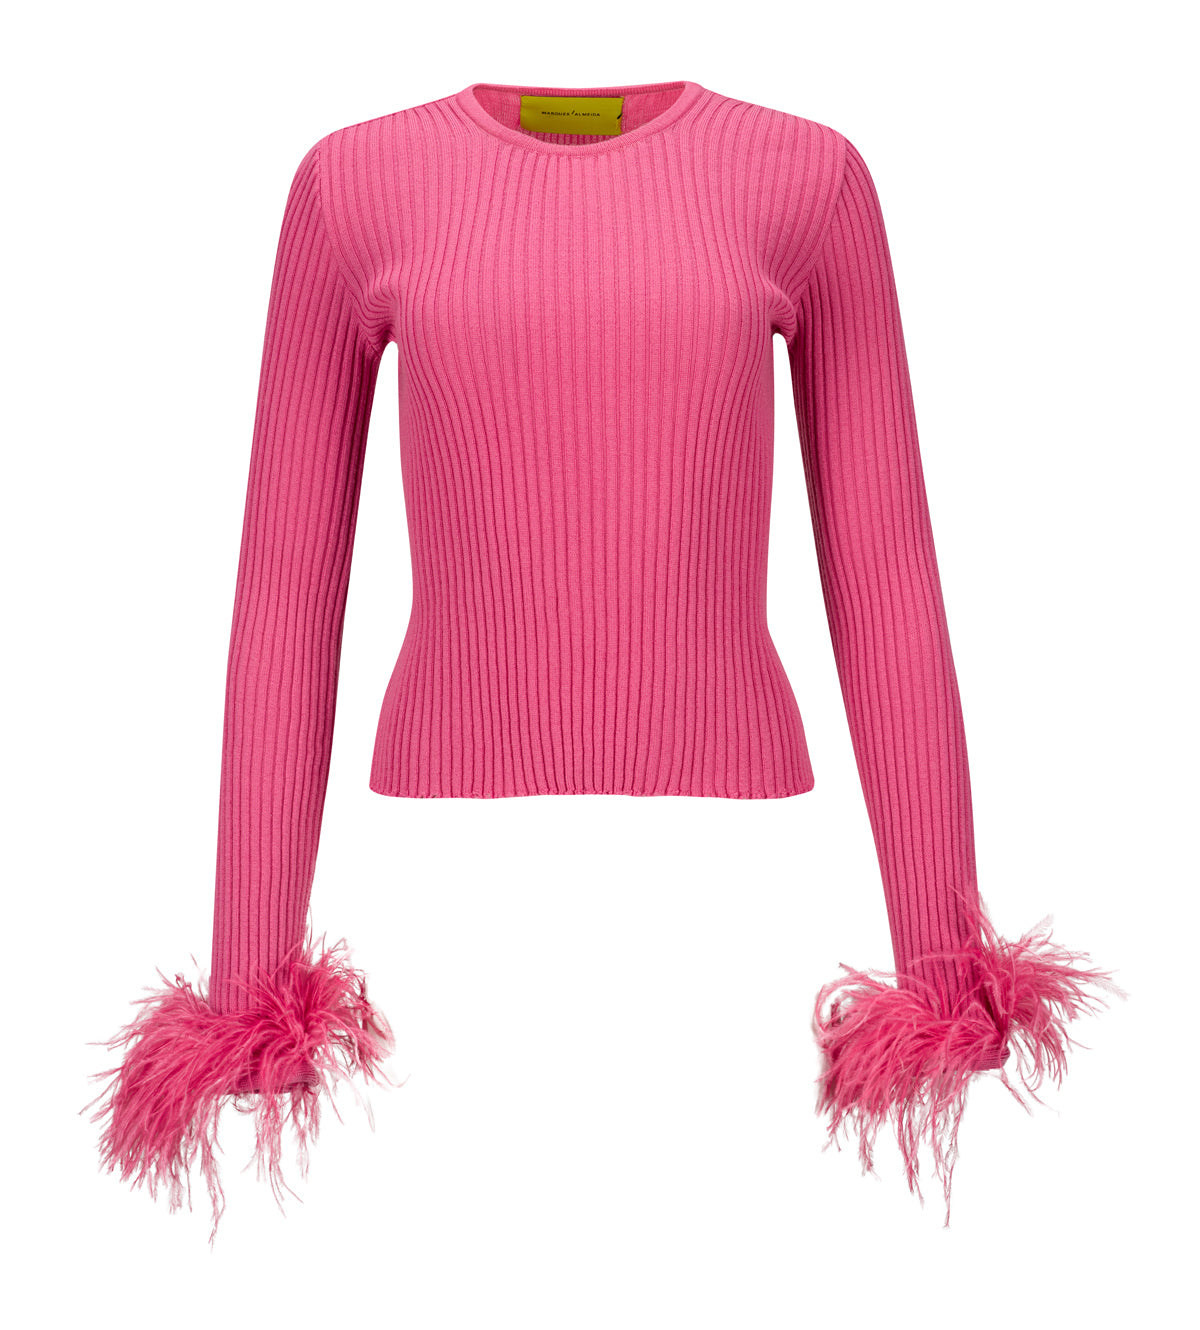 PINK MERINO WOOL FITTED TOP WITH FEATHERS